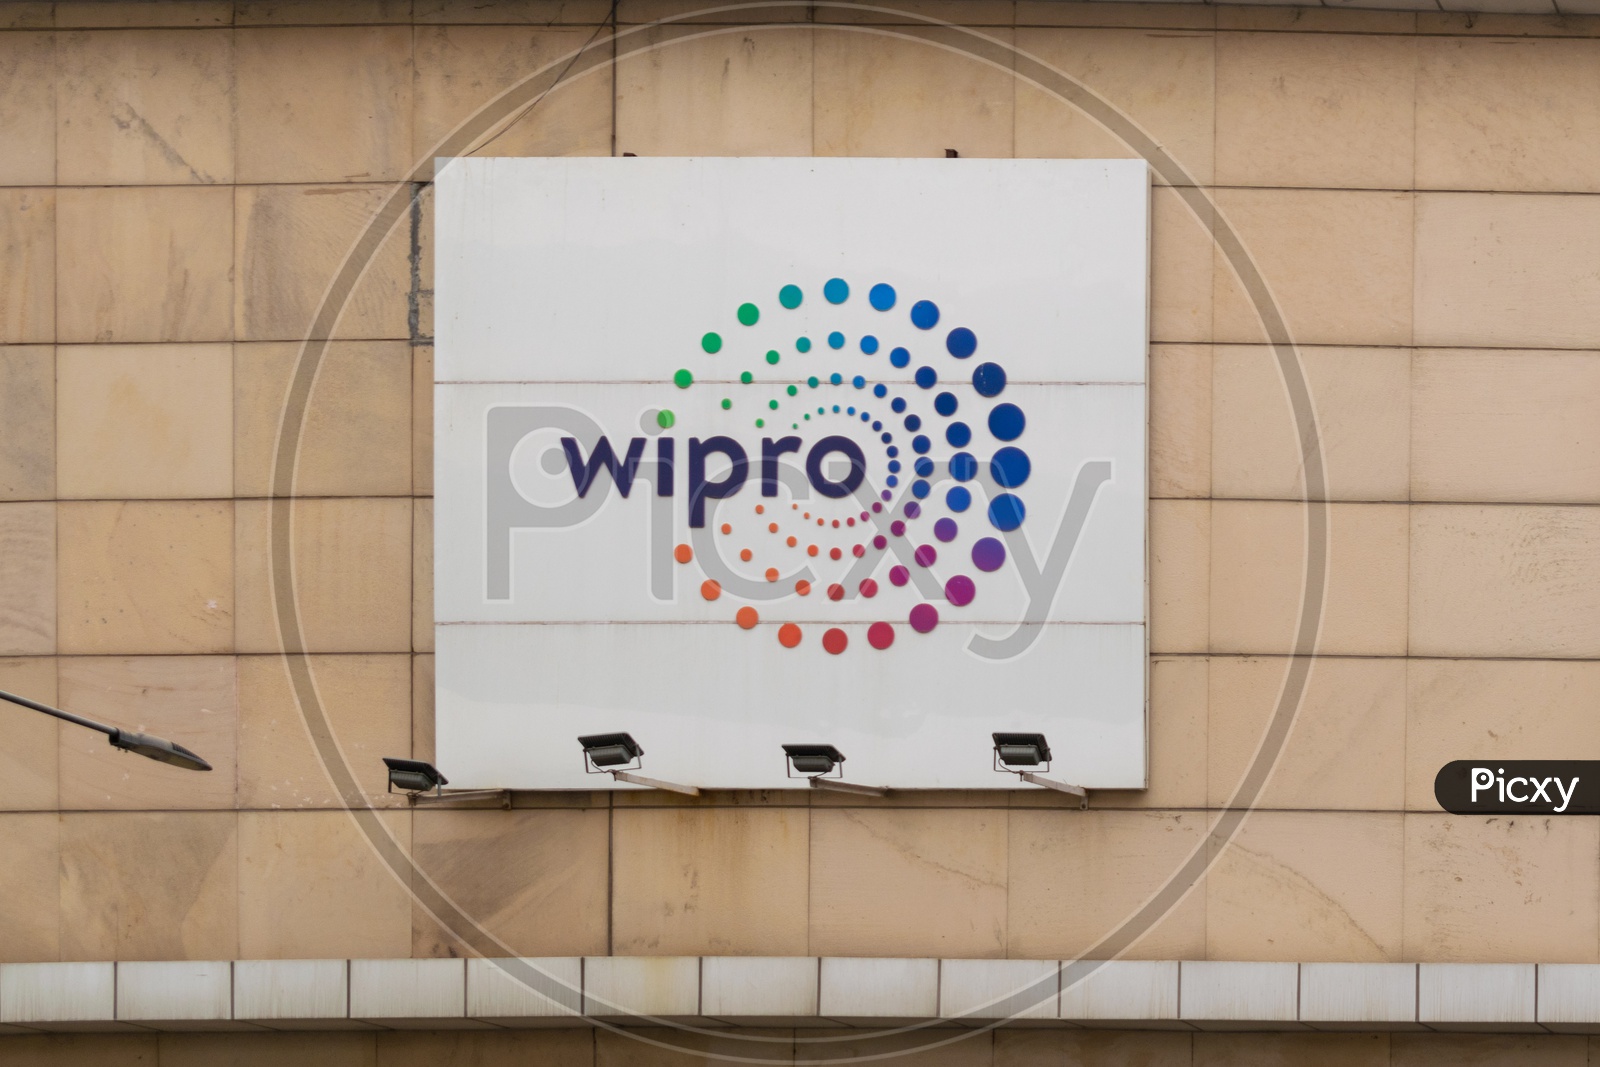 Wipro logo outside the office